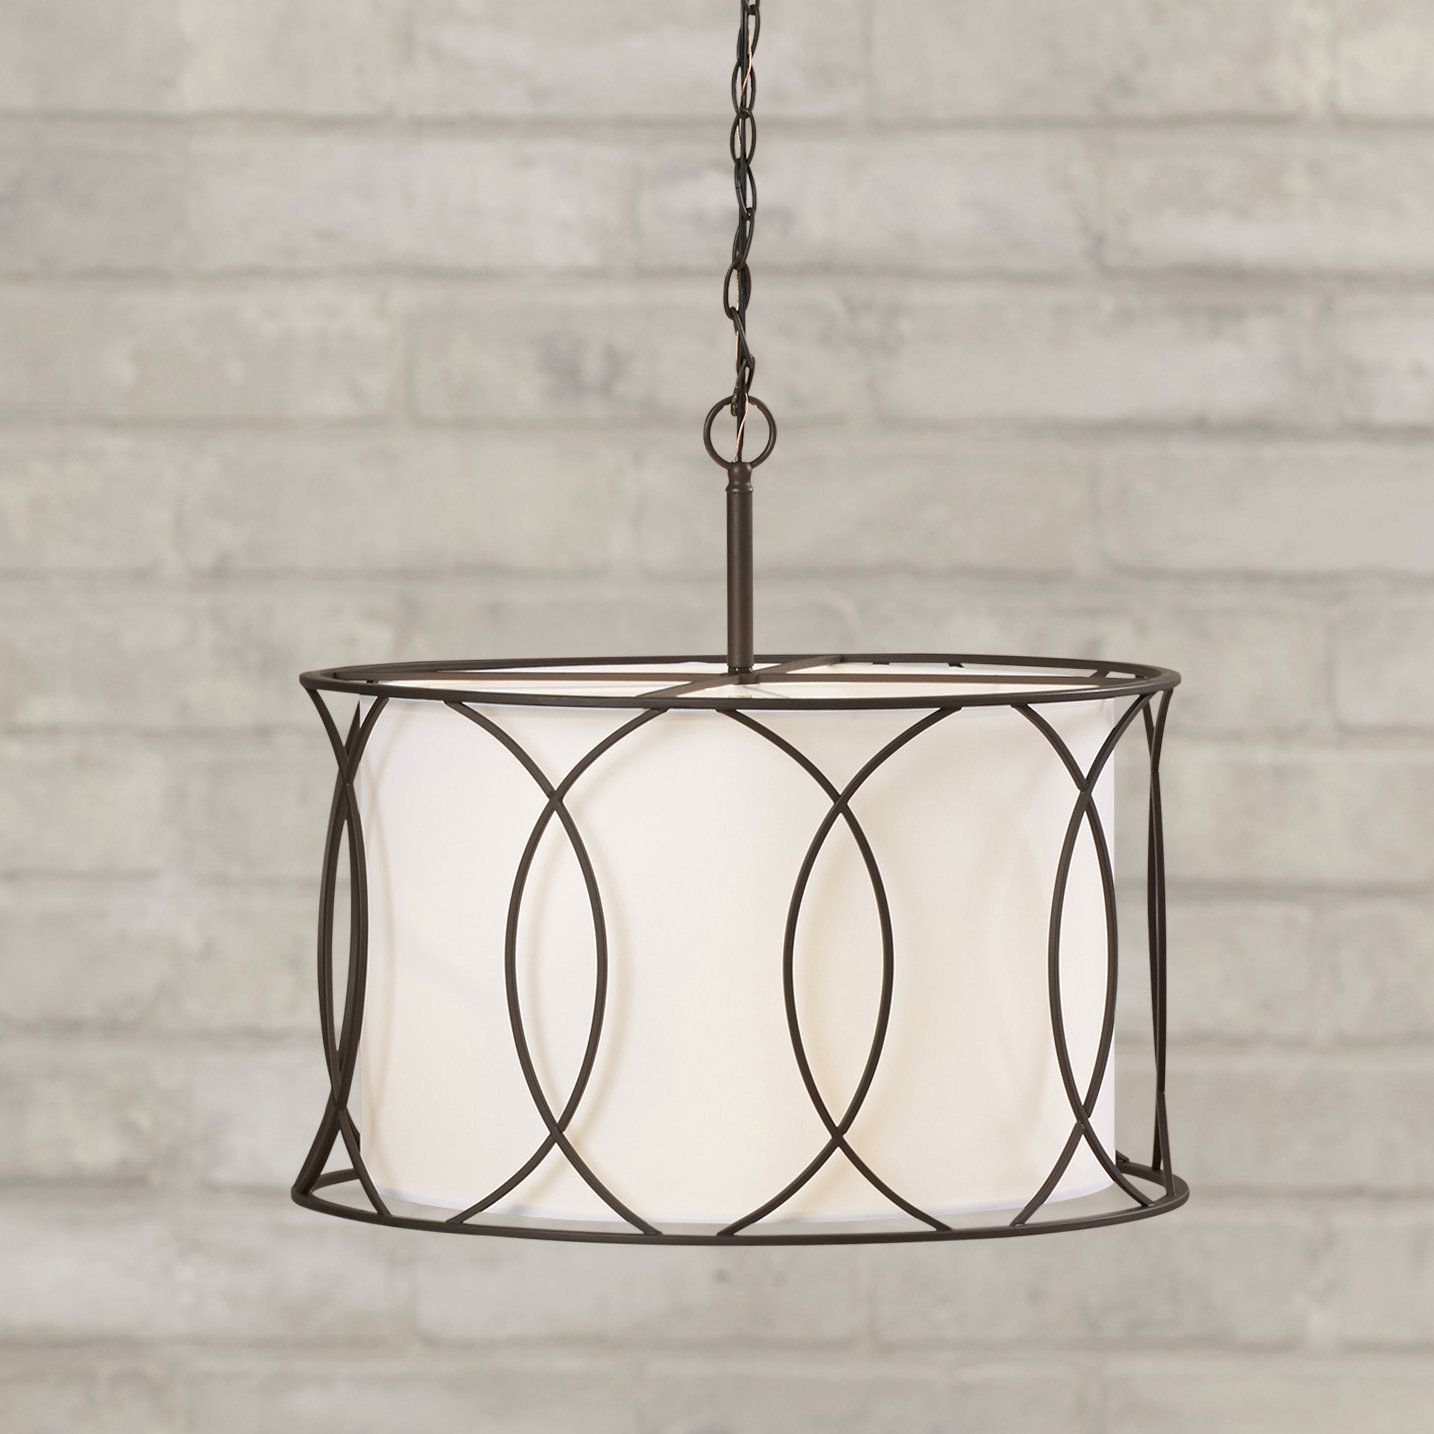 Farmhouse & Rustic Drum Chandeliers | Birch Lane Pertaining To Aadhya 5 Light Drum Chandeliers (View 26 of 30)